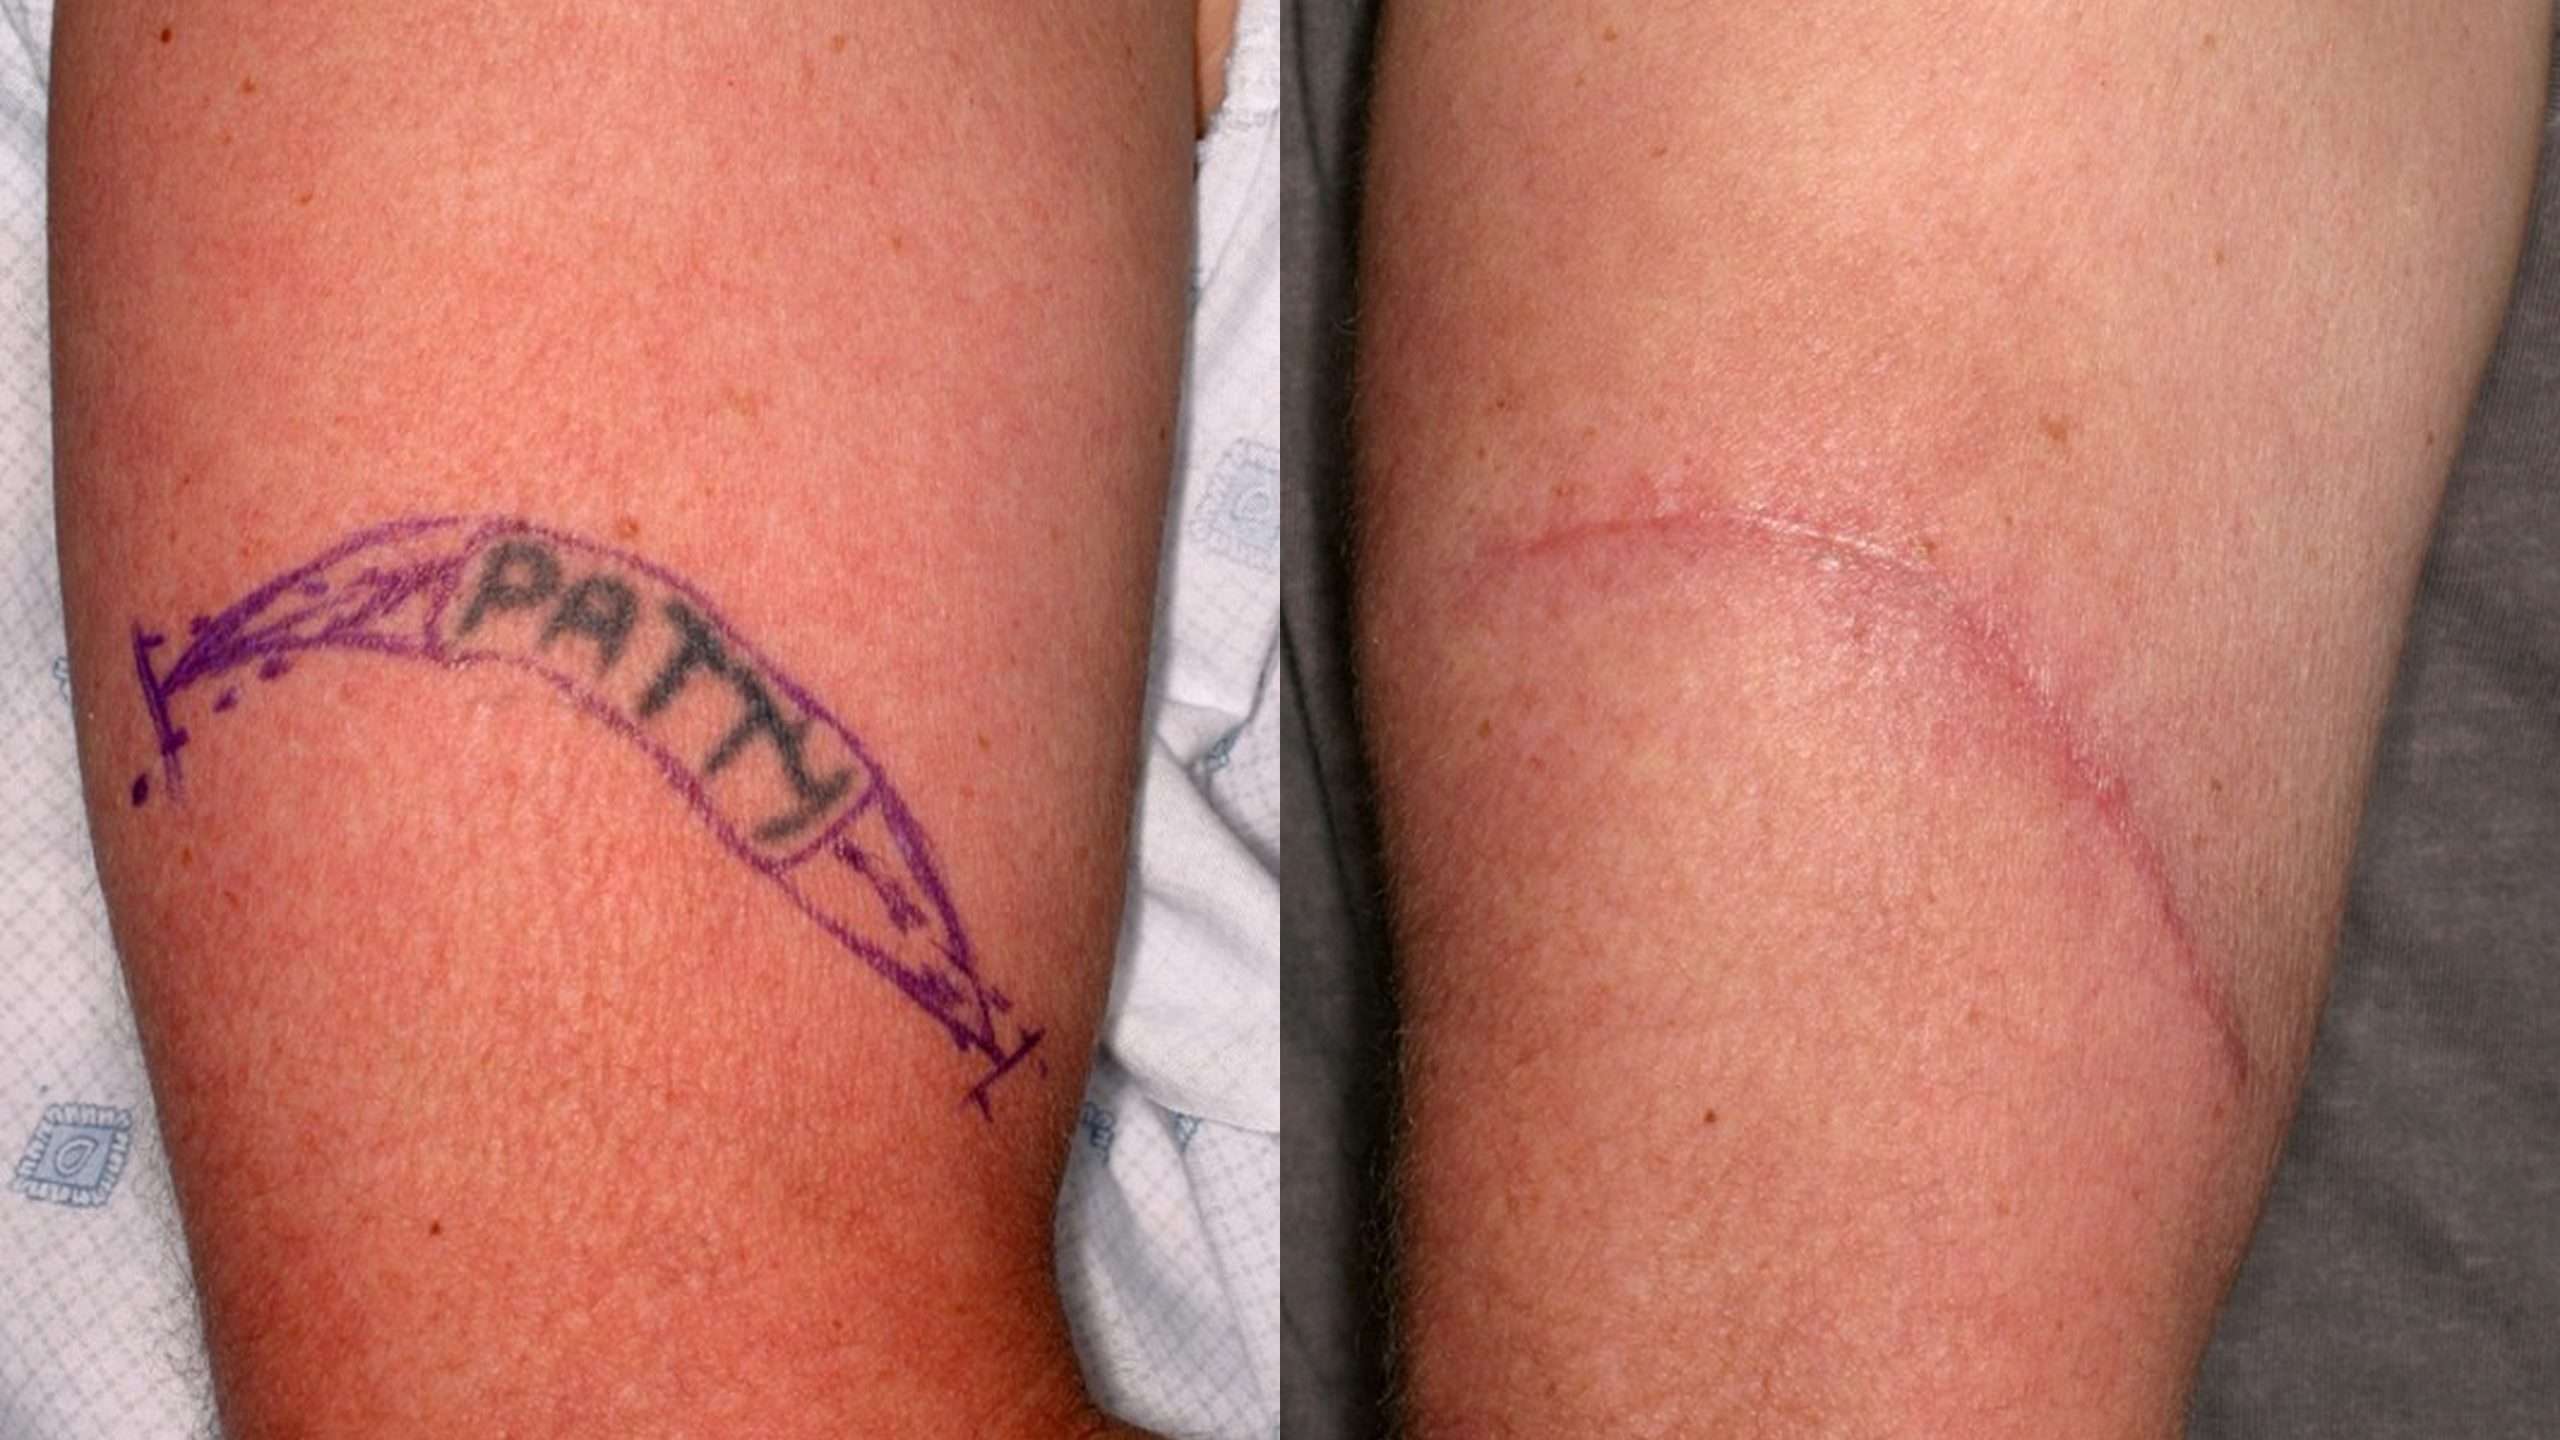 LASER Tattoo Removal, Tattoo Surgery and other methods: All you need to ...